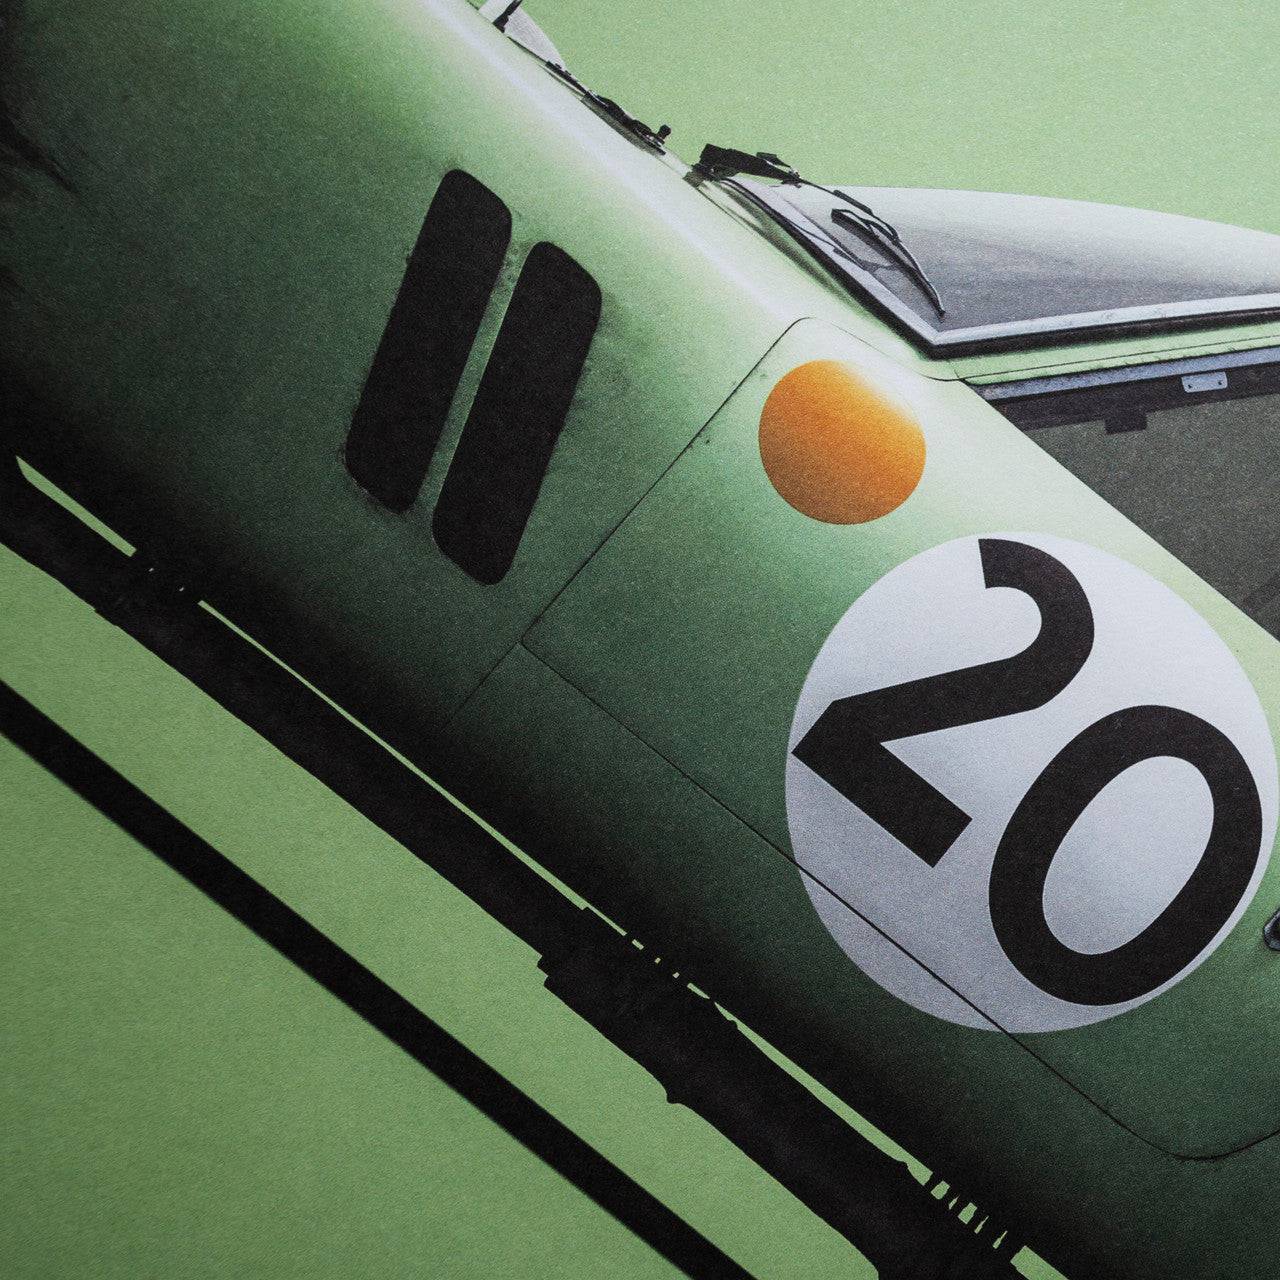 Ferrari 250 GTO - Green - 24h Le Mans - 1962 - Colors of Speed Poster